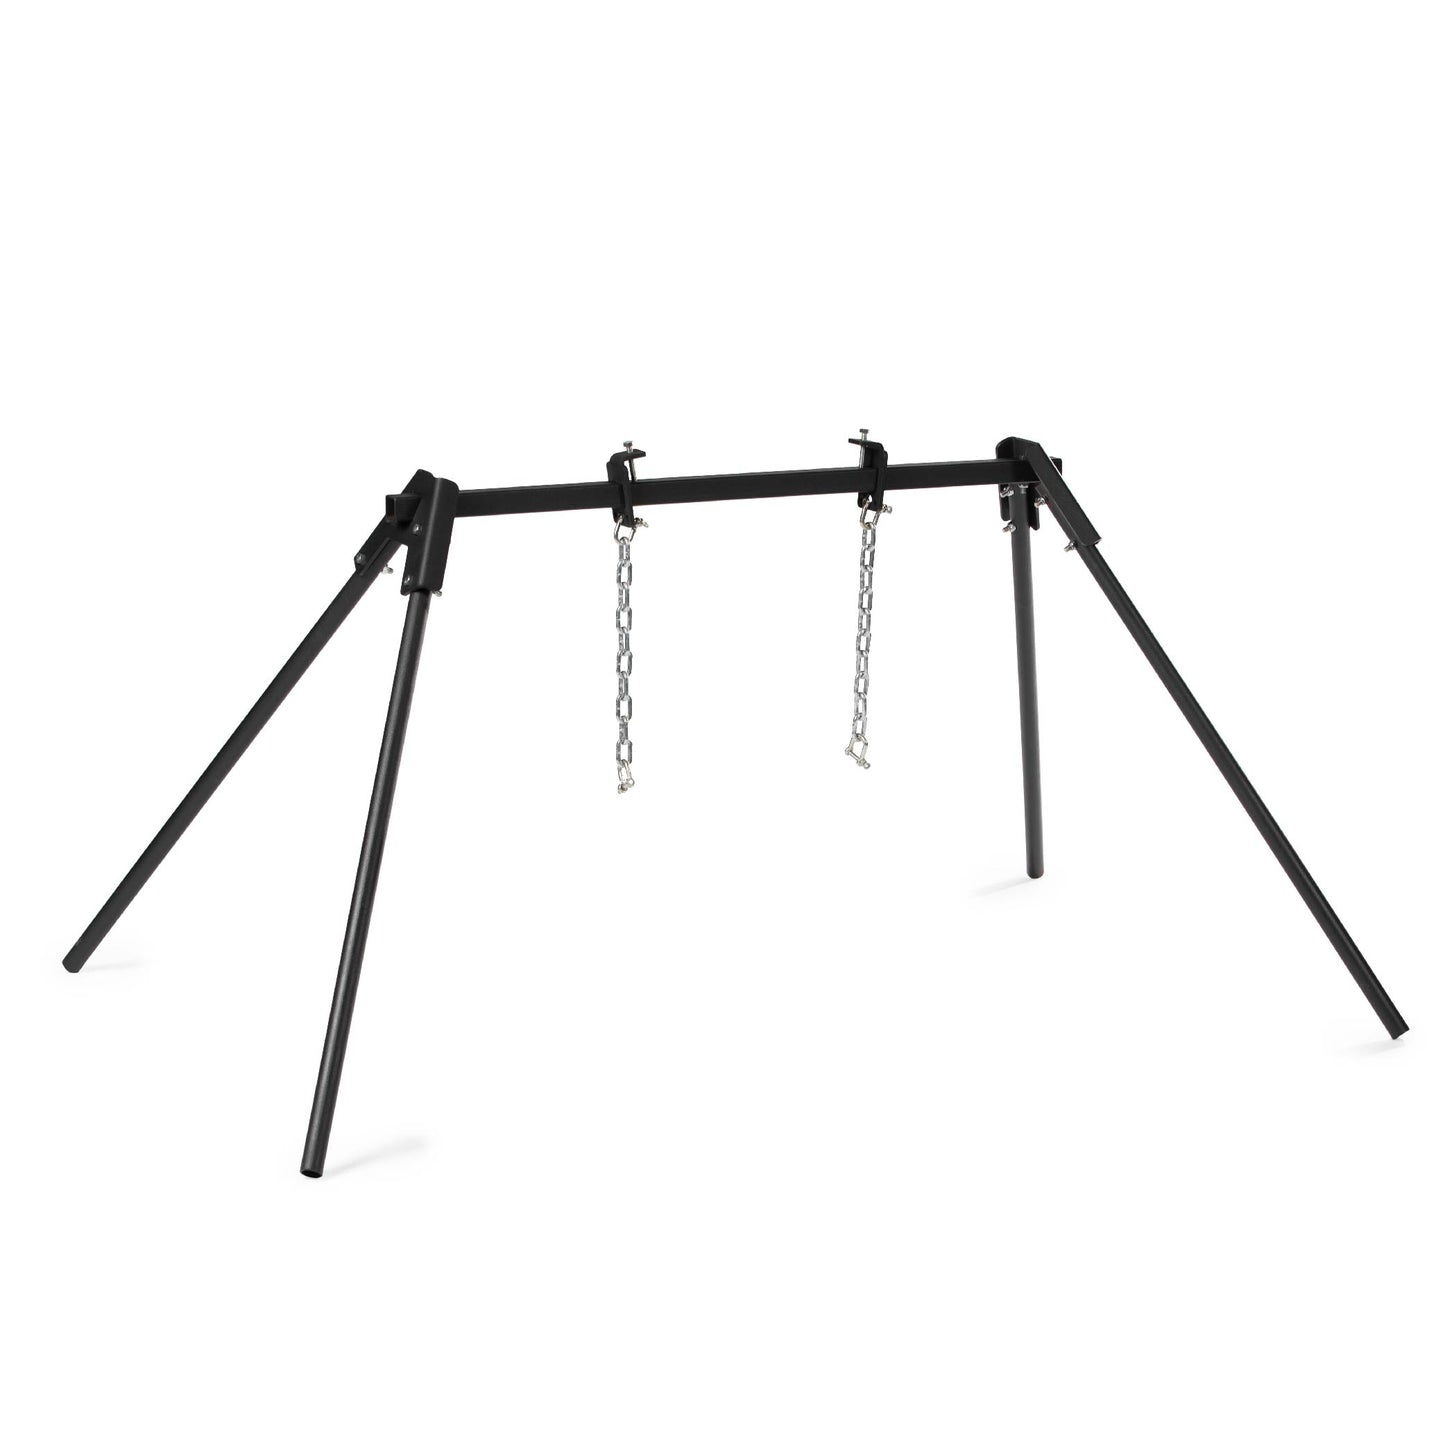 Single Gong Steel Target Stand - view 1